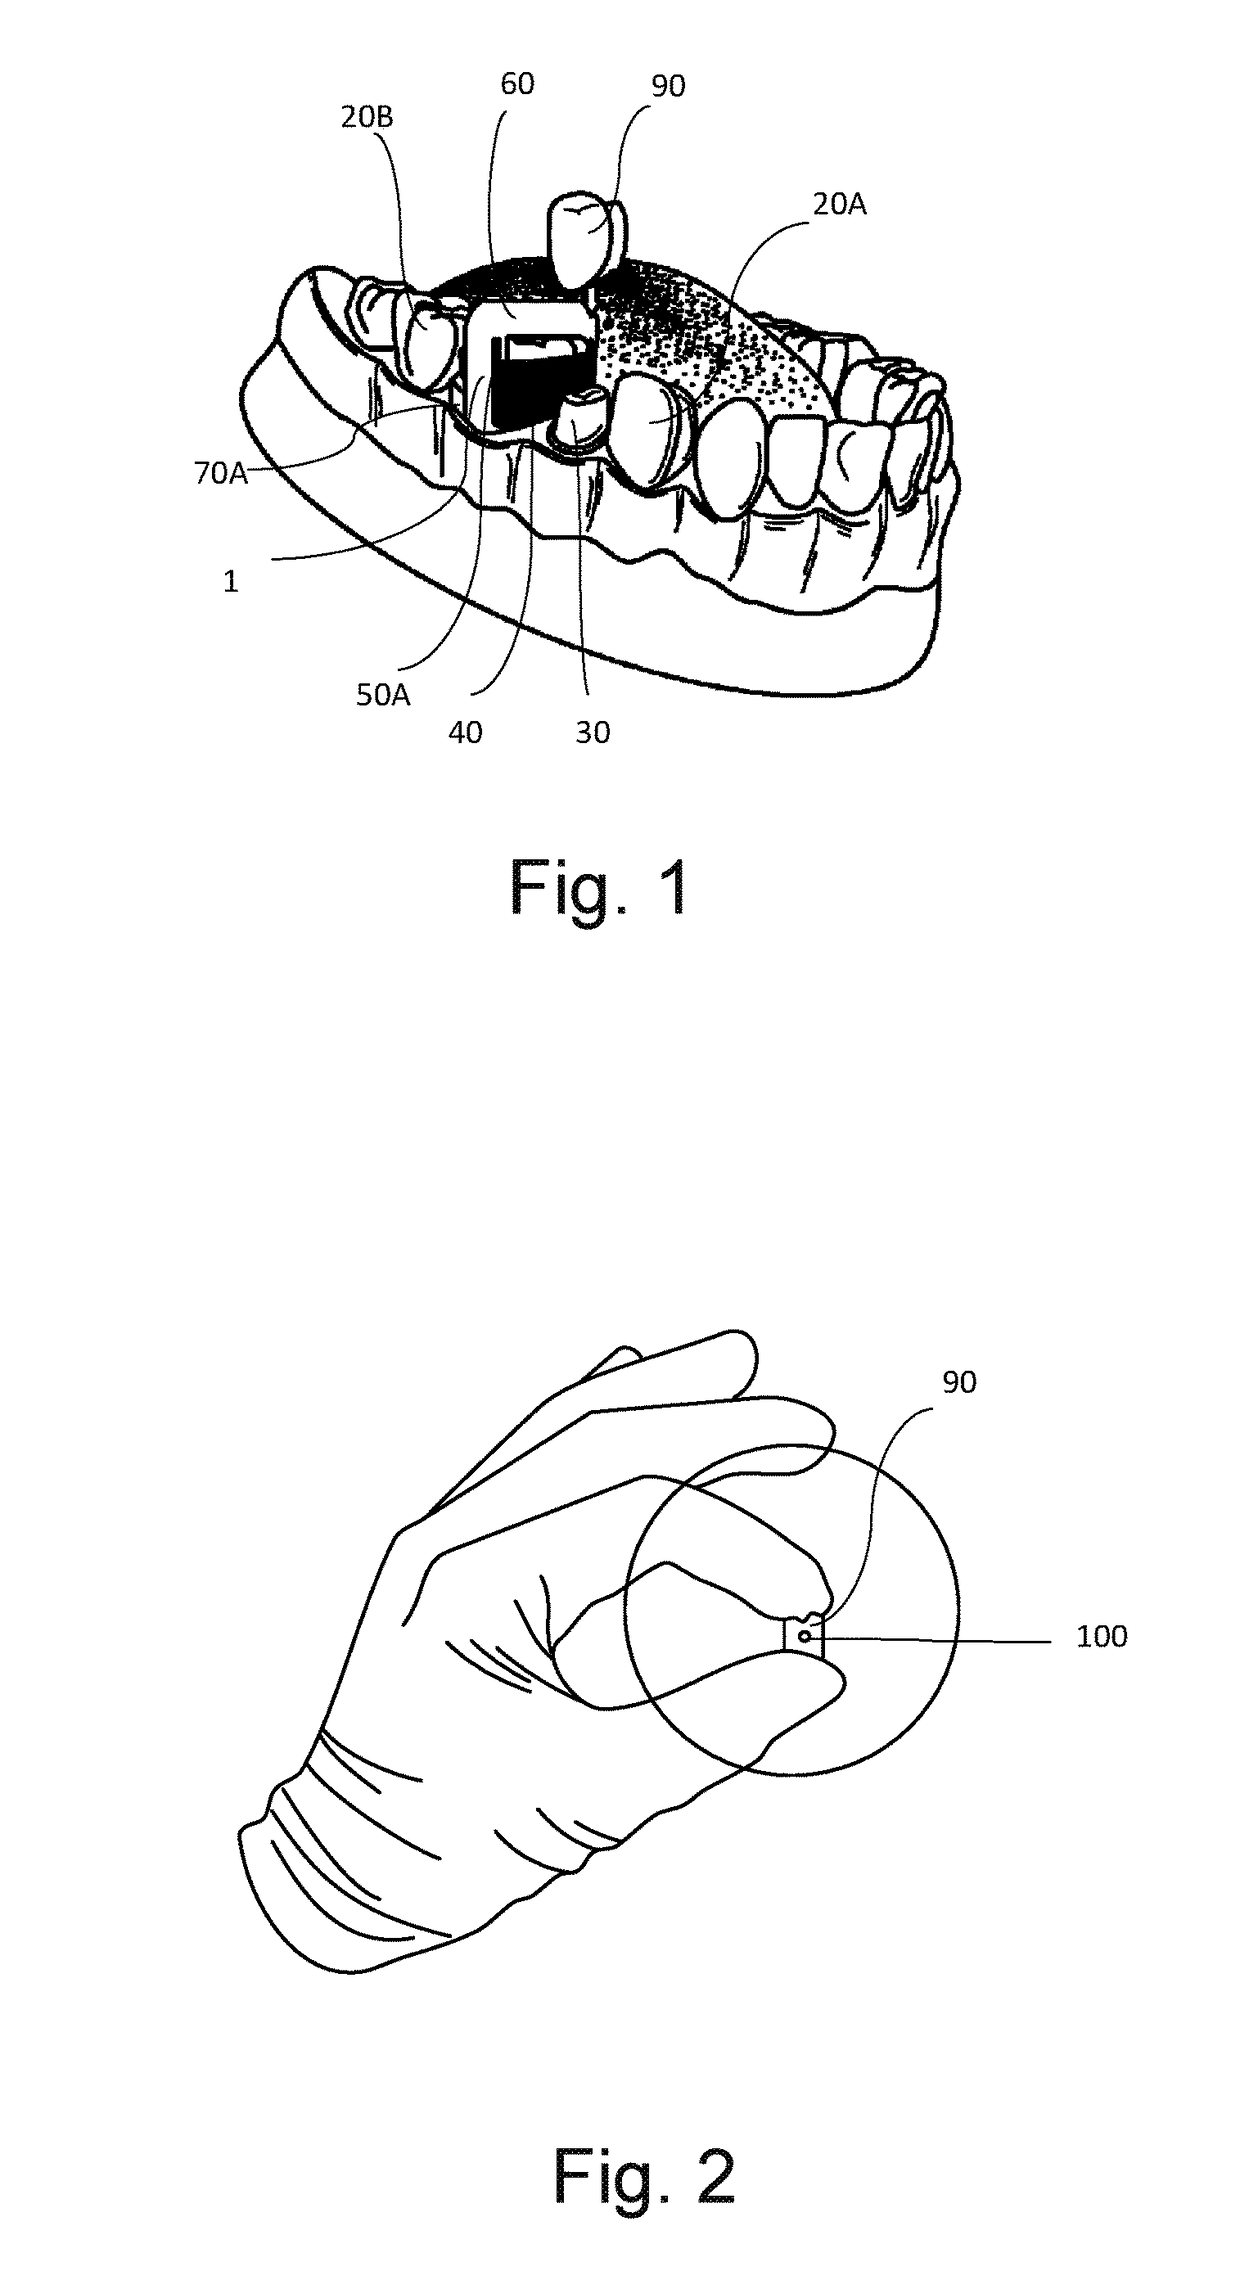 Device for Evaluating Dental Crown Contacts